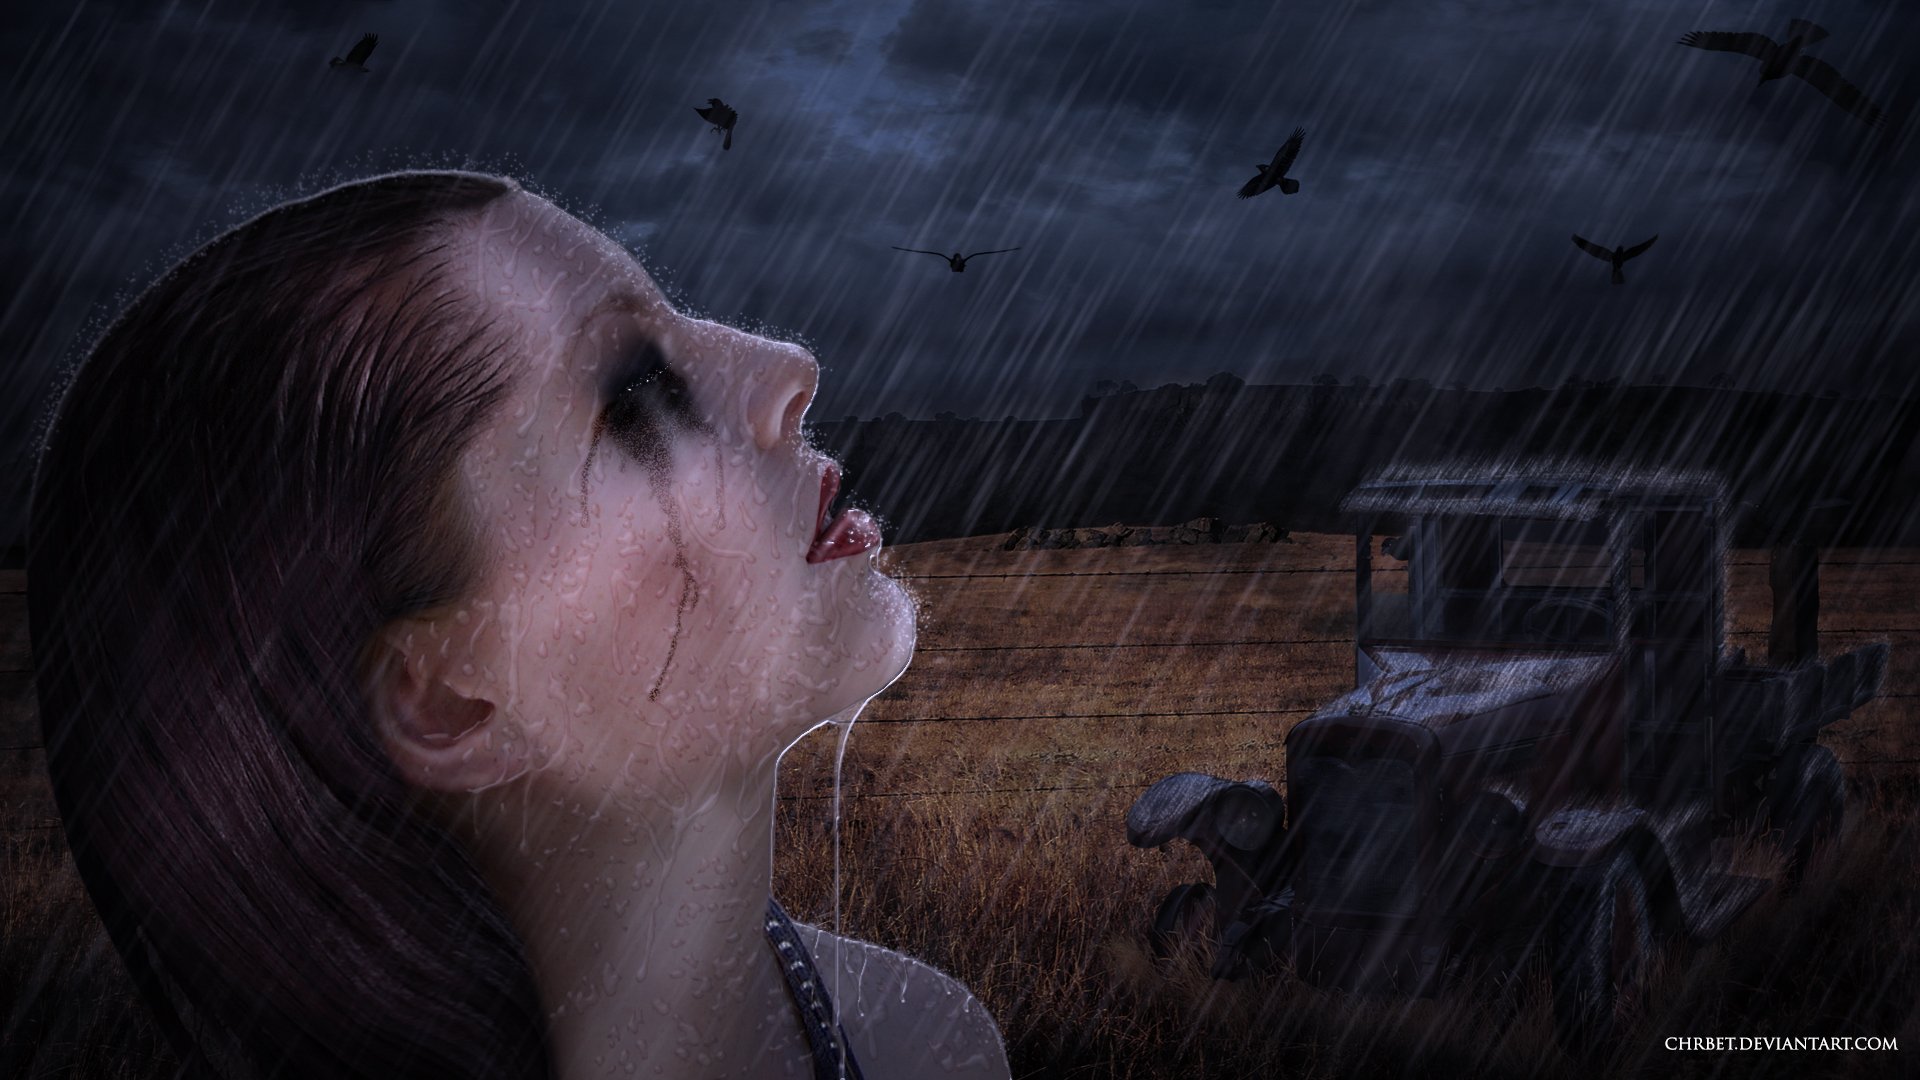 lonely, Mood, Sad, Alone, Sadness, Emotion, People, Loneliness, Solitude, Girl, Rain, Drops Wallpaper